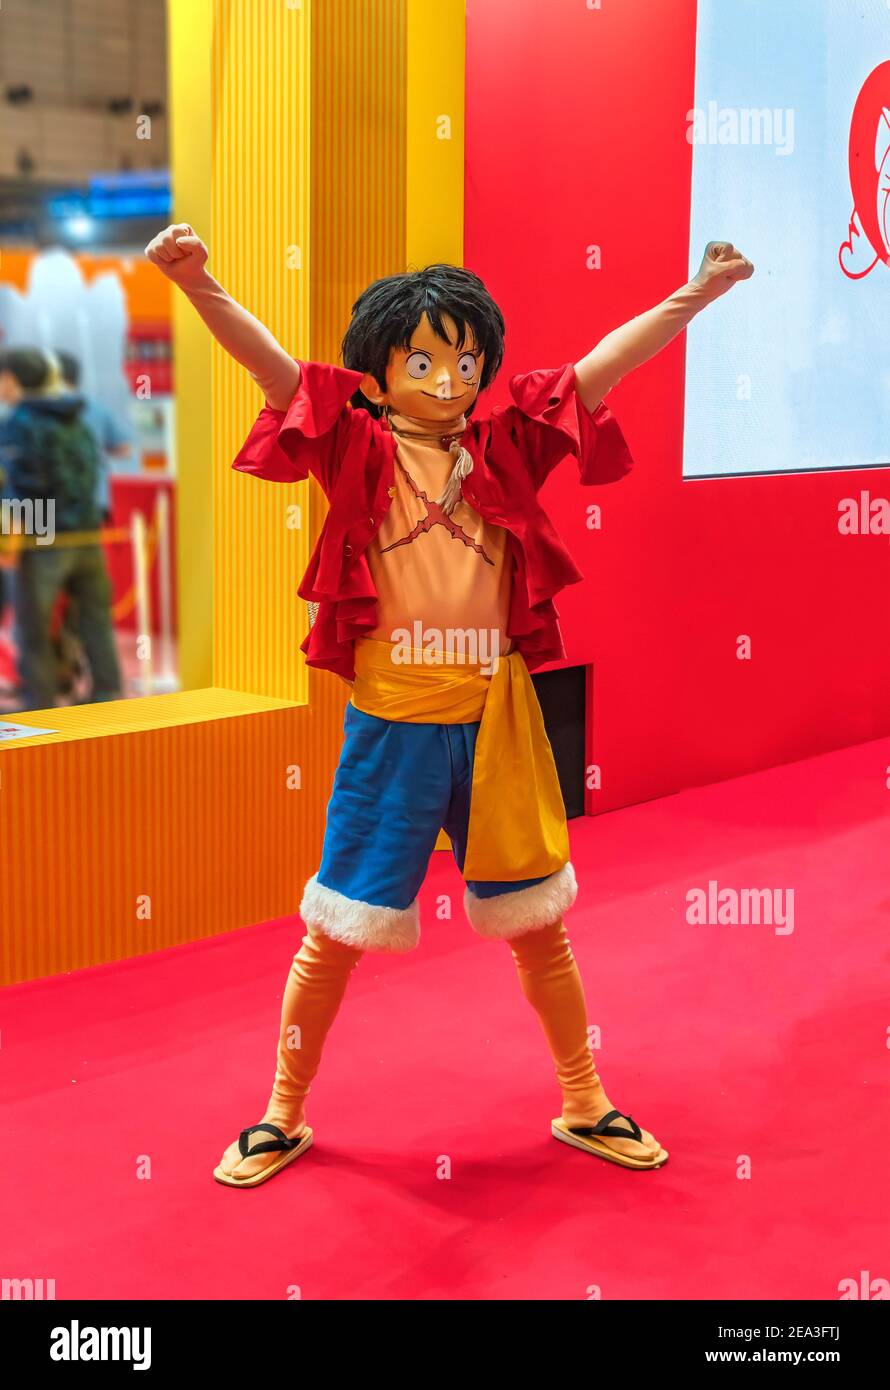 chiba, japan - december 22 2018: Cosplayer wearing costume, mask and wig of the pirate character Monkey D.Luffy of the manga and anime series of One P Stock Photo